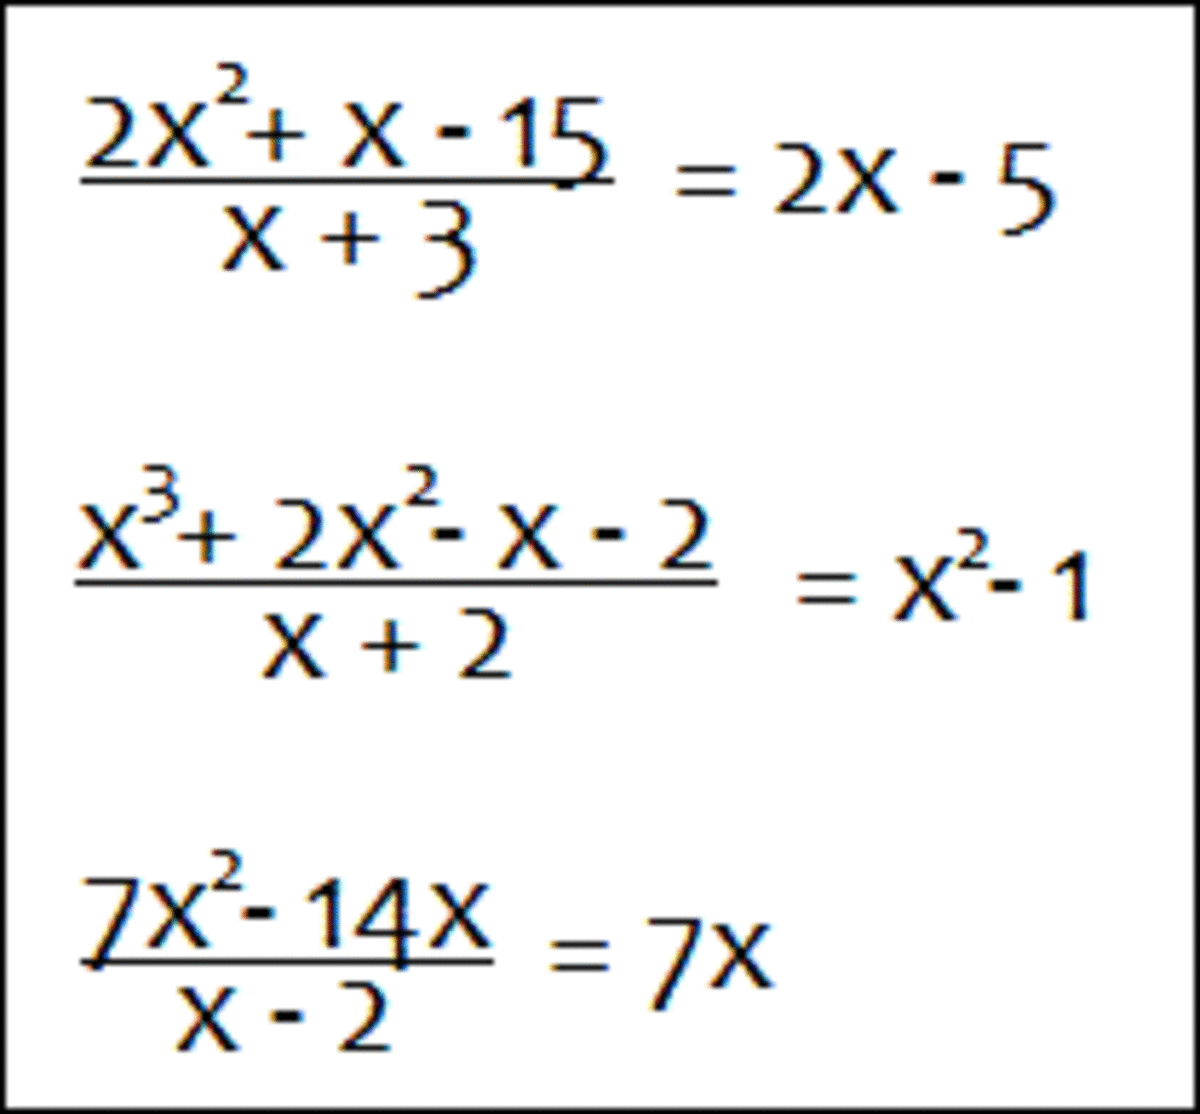 Examples of division of polynomials